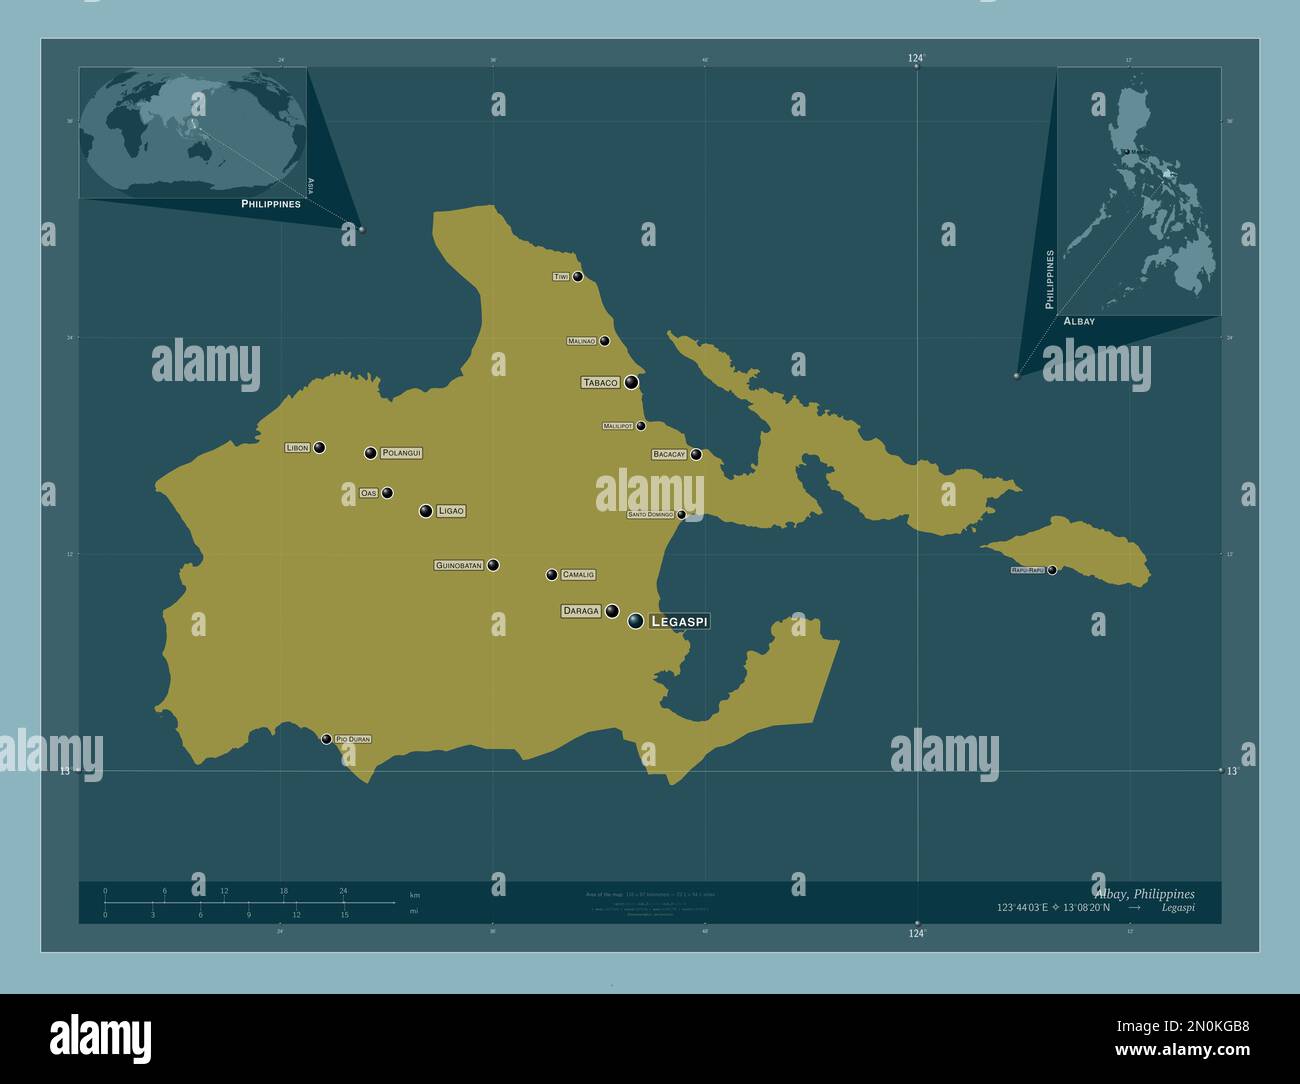 Albay, province of Philippines. Solid color shape. Locations and names of major cities of the region. Corner auxiliary location maps Stock Photo